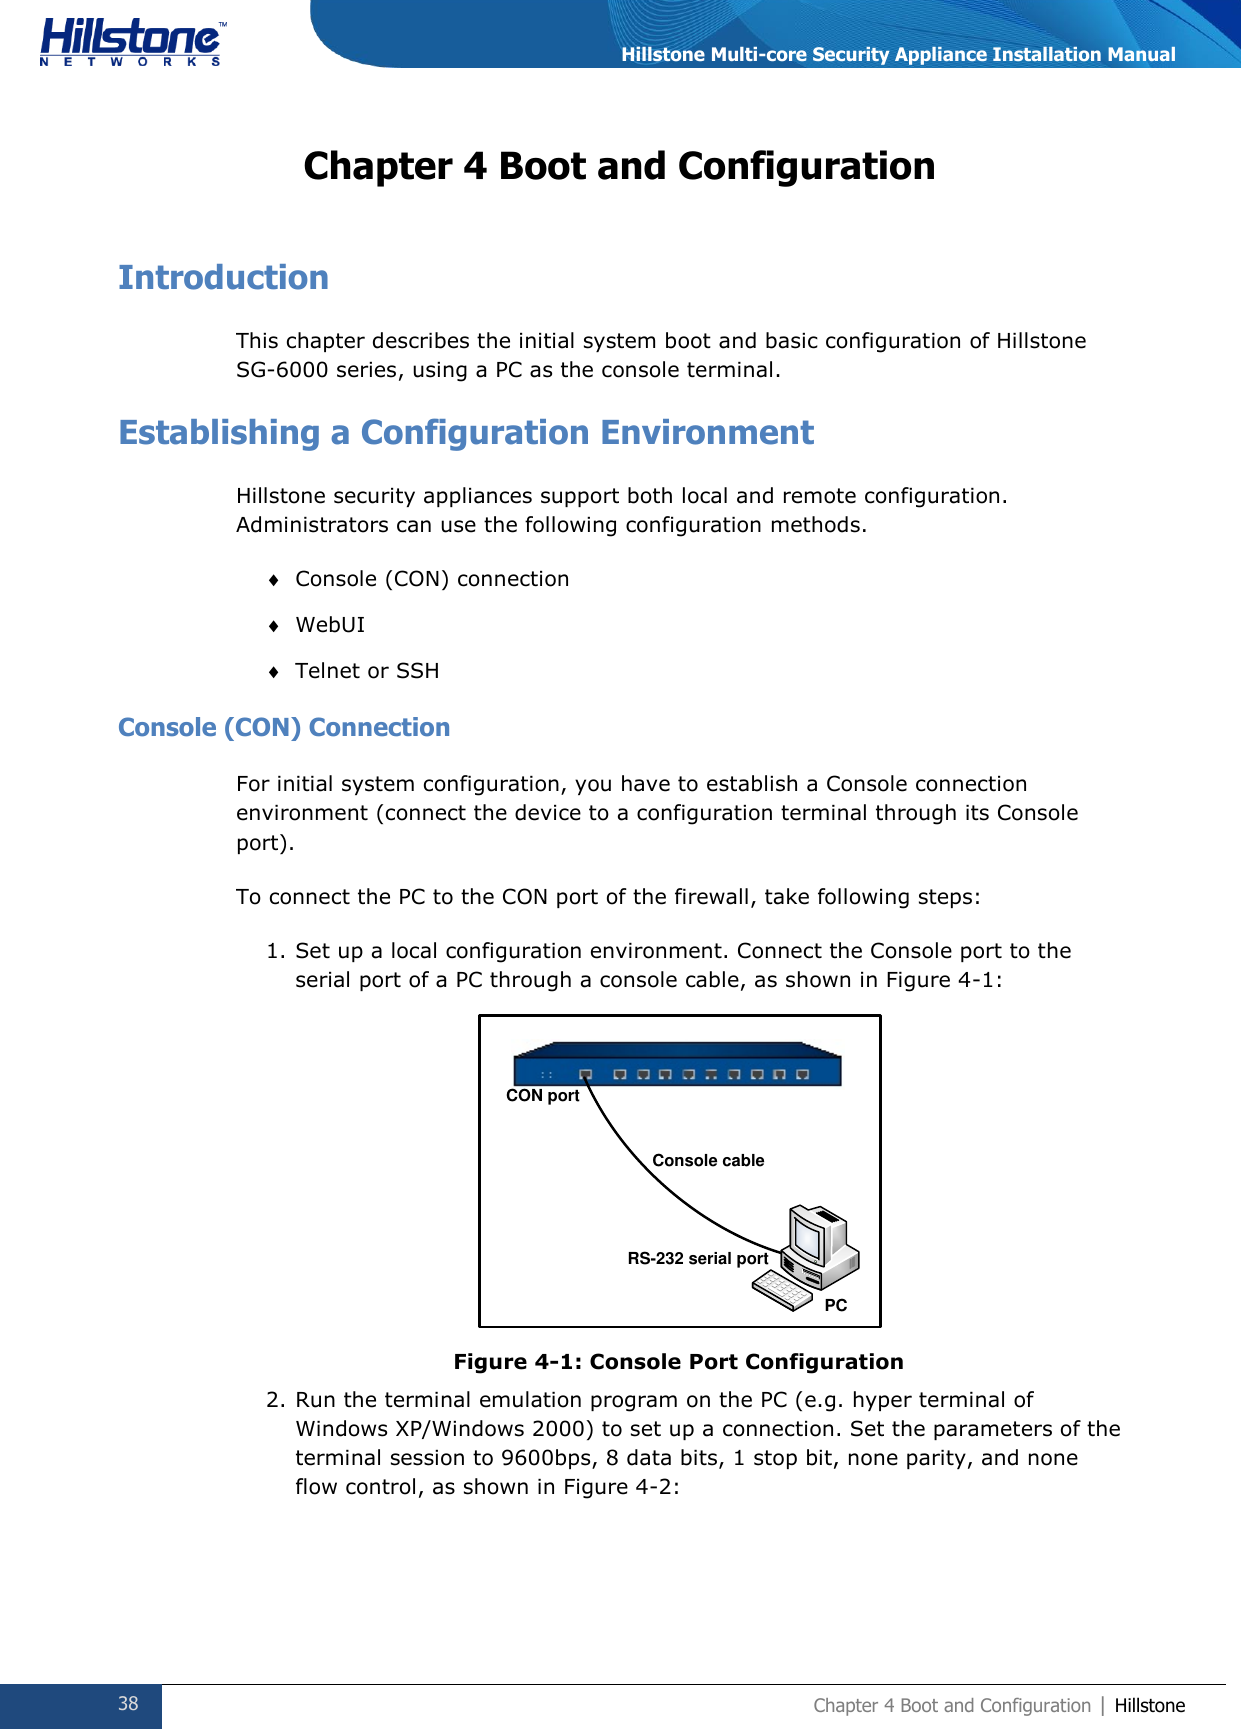  38 Chapter 4 Boot and Configuration | Hillstone  Hillstone Multi-core Security Appliance Installation Manual Chapter 4 Boot and Configuration Introduction This chapter describes the initial system boot and basic configuration of Hillstone SG-6000 series, using a PC as the console terminal. Establishing a Configuration Environment Hillstone security appliances support both local and remote configuration. Administrators can use the following configuration methods.  Console (CON) connection  WebUI  Telnet or SSH Console (CON) Connection For initial system configuration, you have to establish a Console connection environment (connect the device to a configuration terminal through its Console port).  To connect the PC to the CON port of the firewall, take following steps: 1. Set up a local configuration environment. Connect the Console port to the serial port of a PC through a console cable, as shown in Figure 4-1:  Figure 4-1: Console Port Configuration 2. Run the terminal emulation program on the PC (e.g. hyper terminal of Windows XP/Windows 2000) to set up a connection. Set the parameters of the terminal session to 9600bps, 8 data bits, 1 stop bit, none parity, and none flow control, as shown in Figure 4-2: CON portConsole cableRS-232 serial portPC